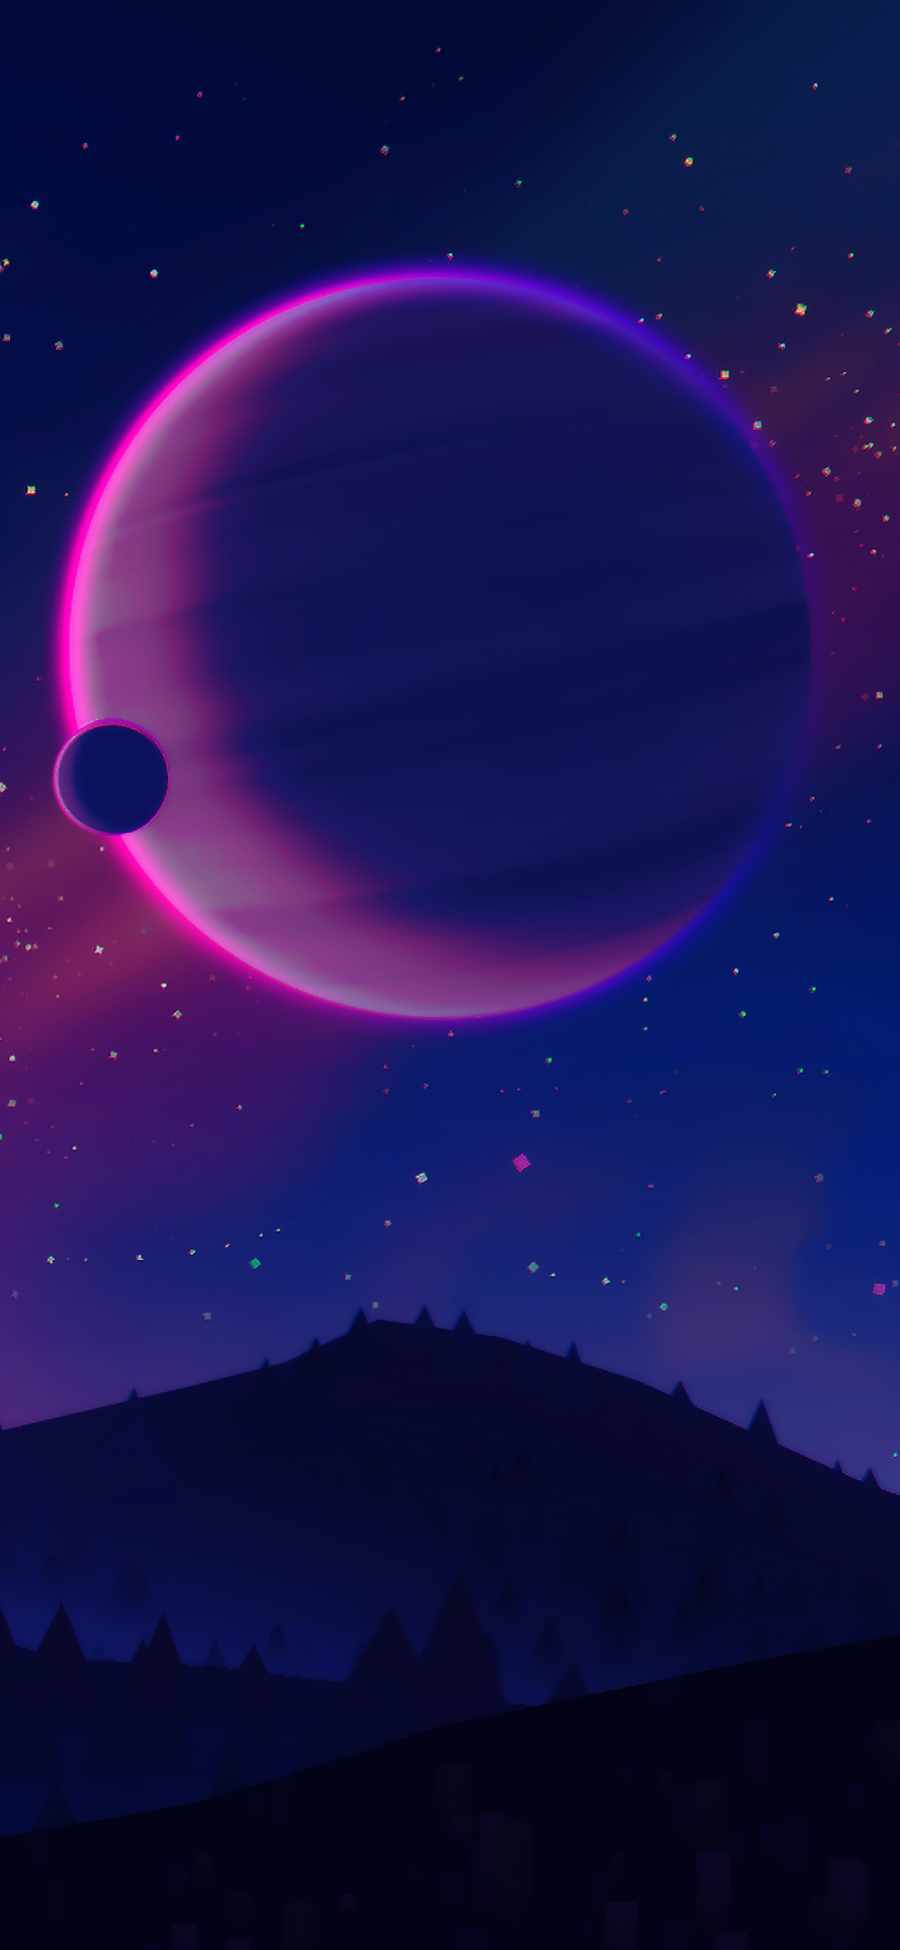 Space View from Land iPhone Wallpaper